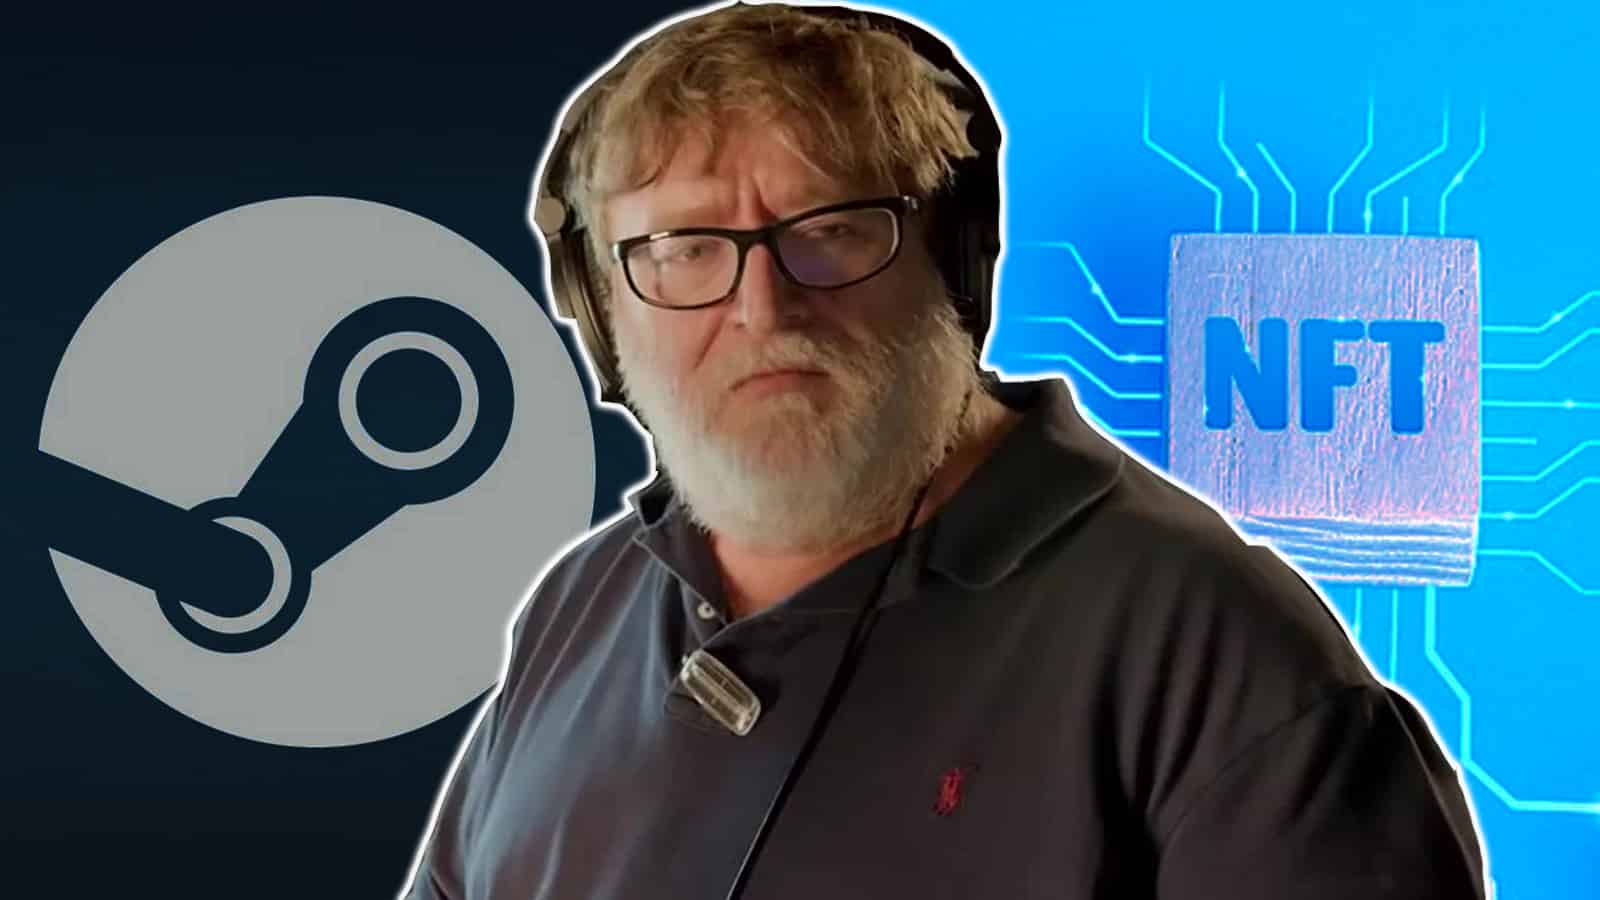 An image of gabe newell of steam